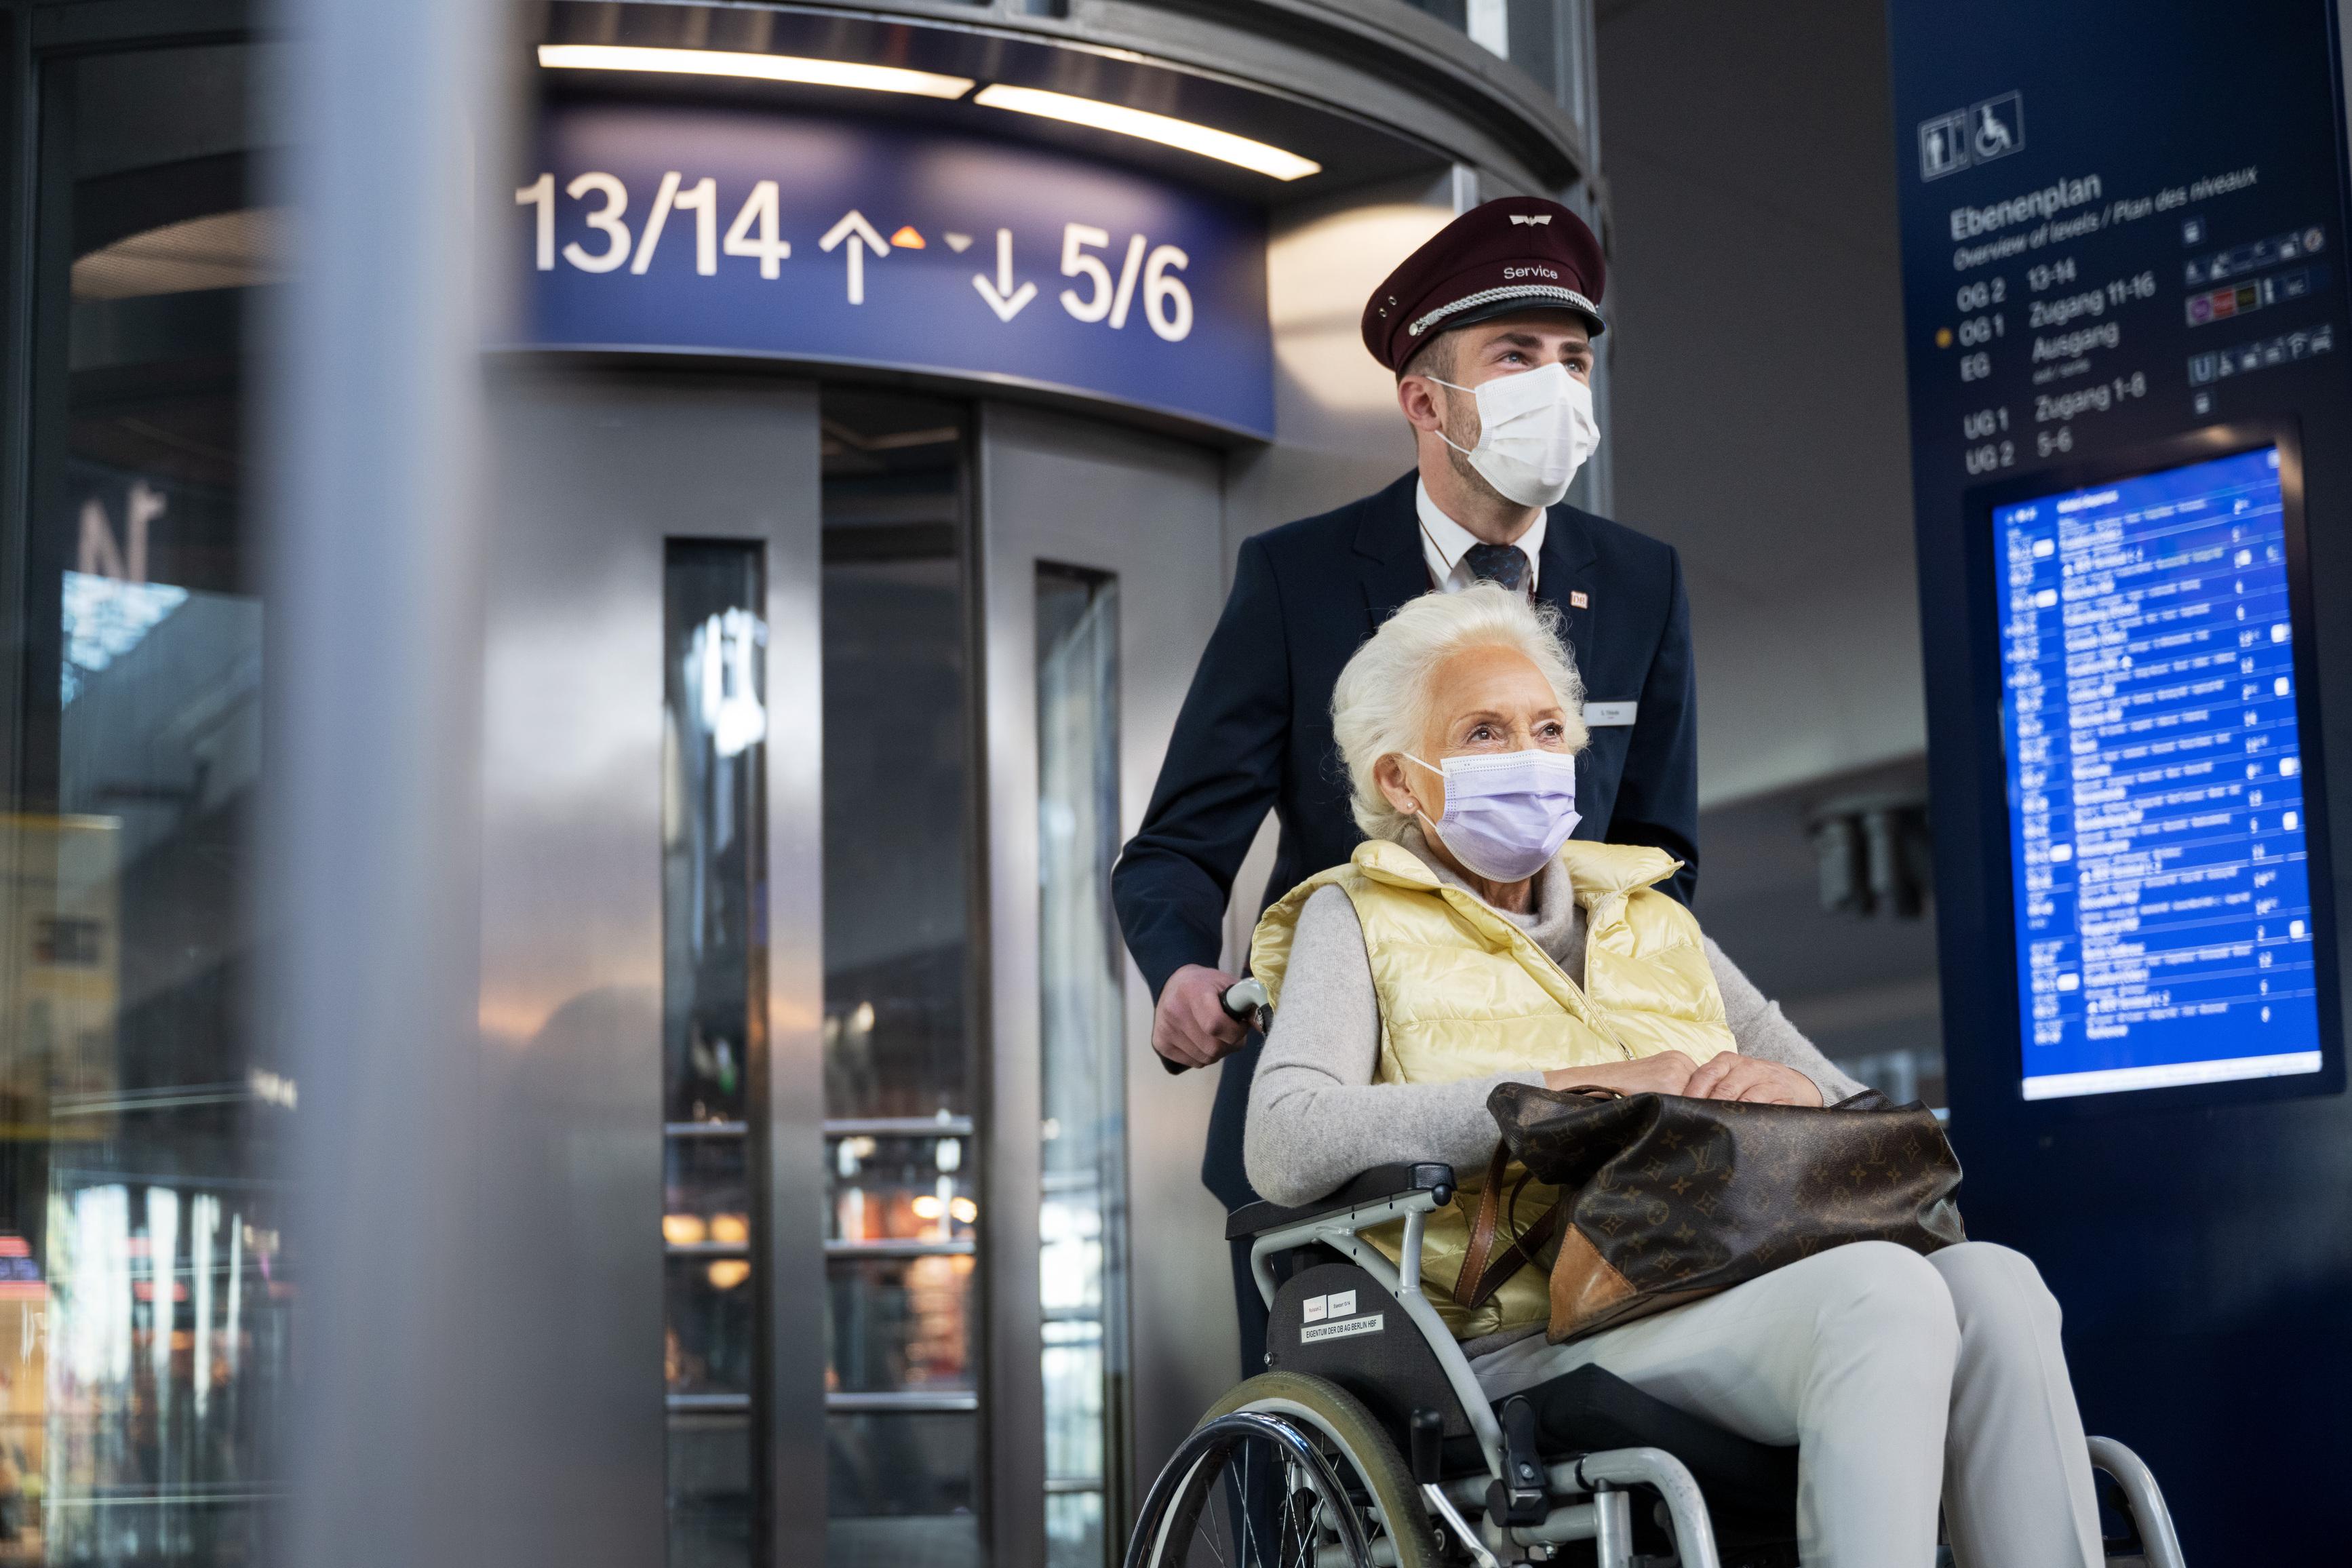 A DB employee helps a wheelchair user at Berlin Central Station as part of the mobility service.